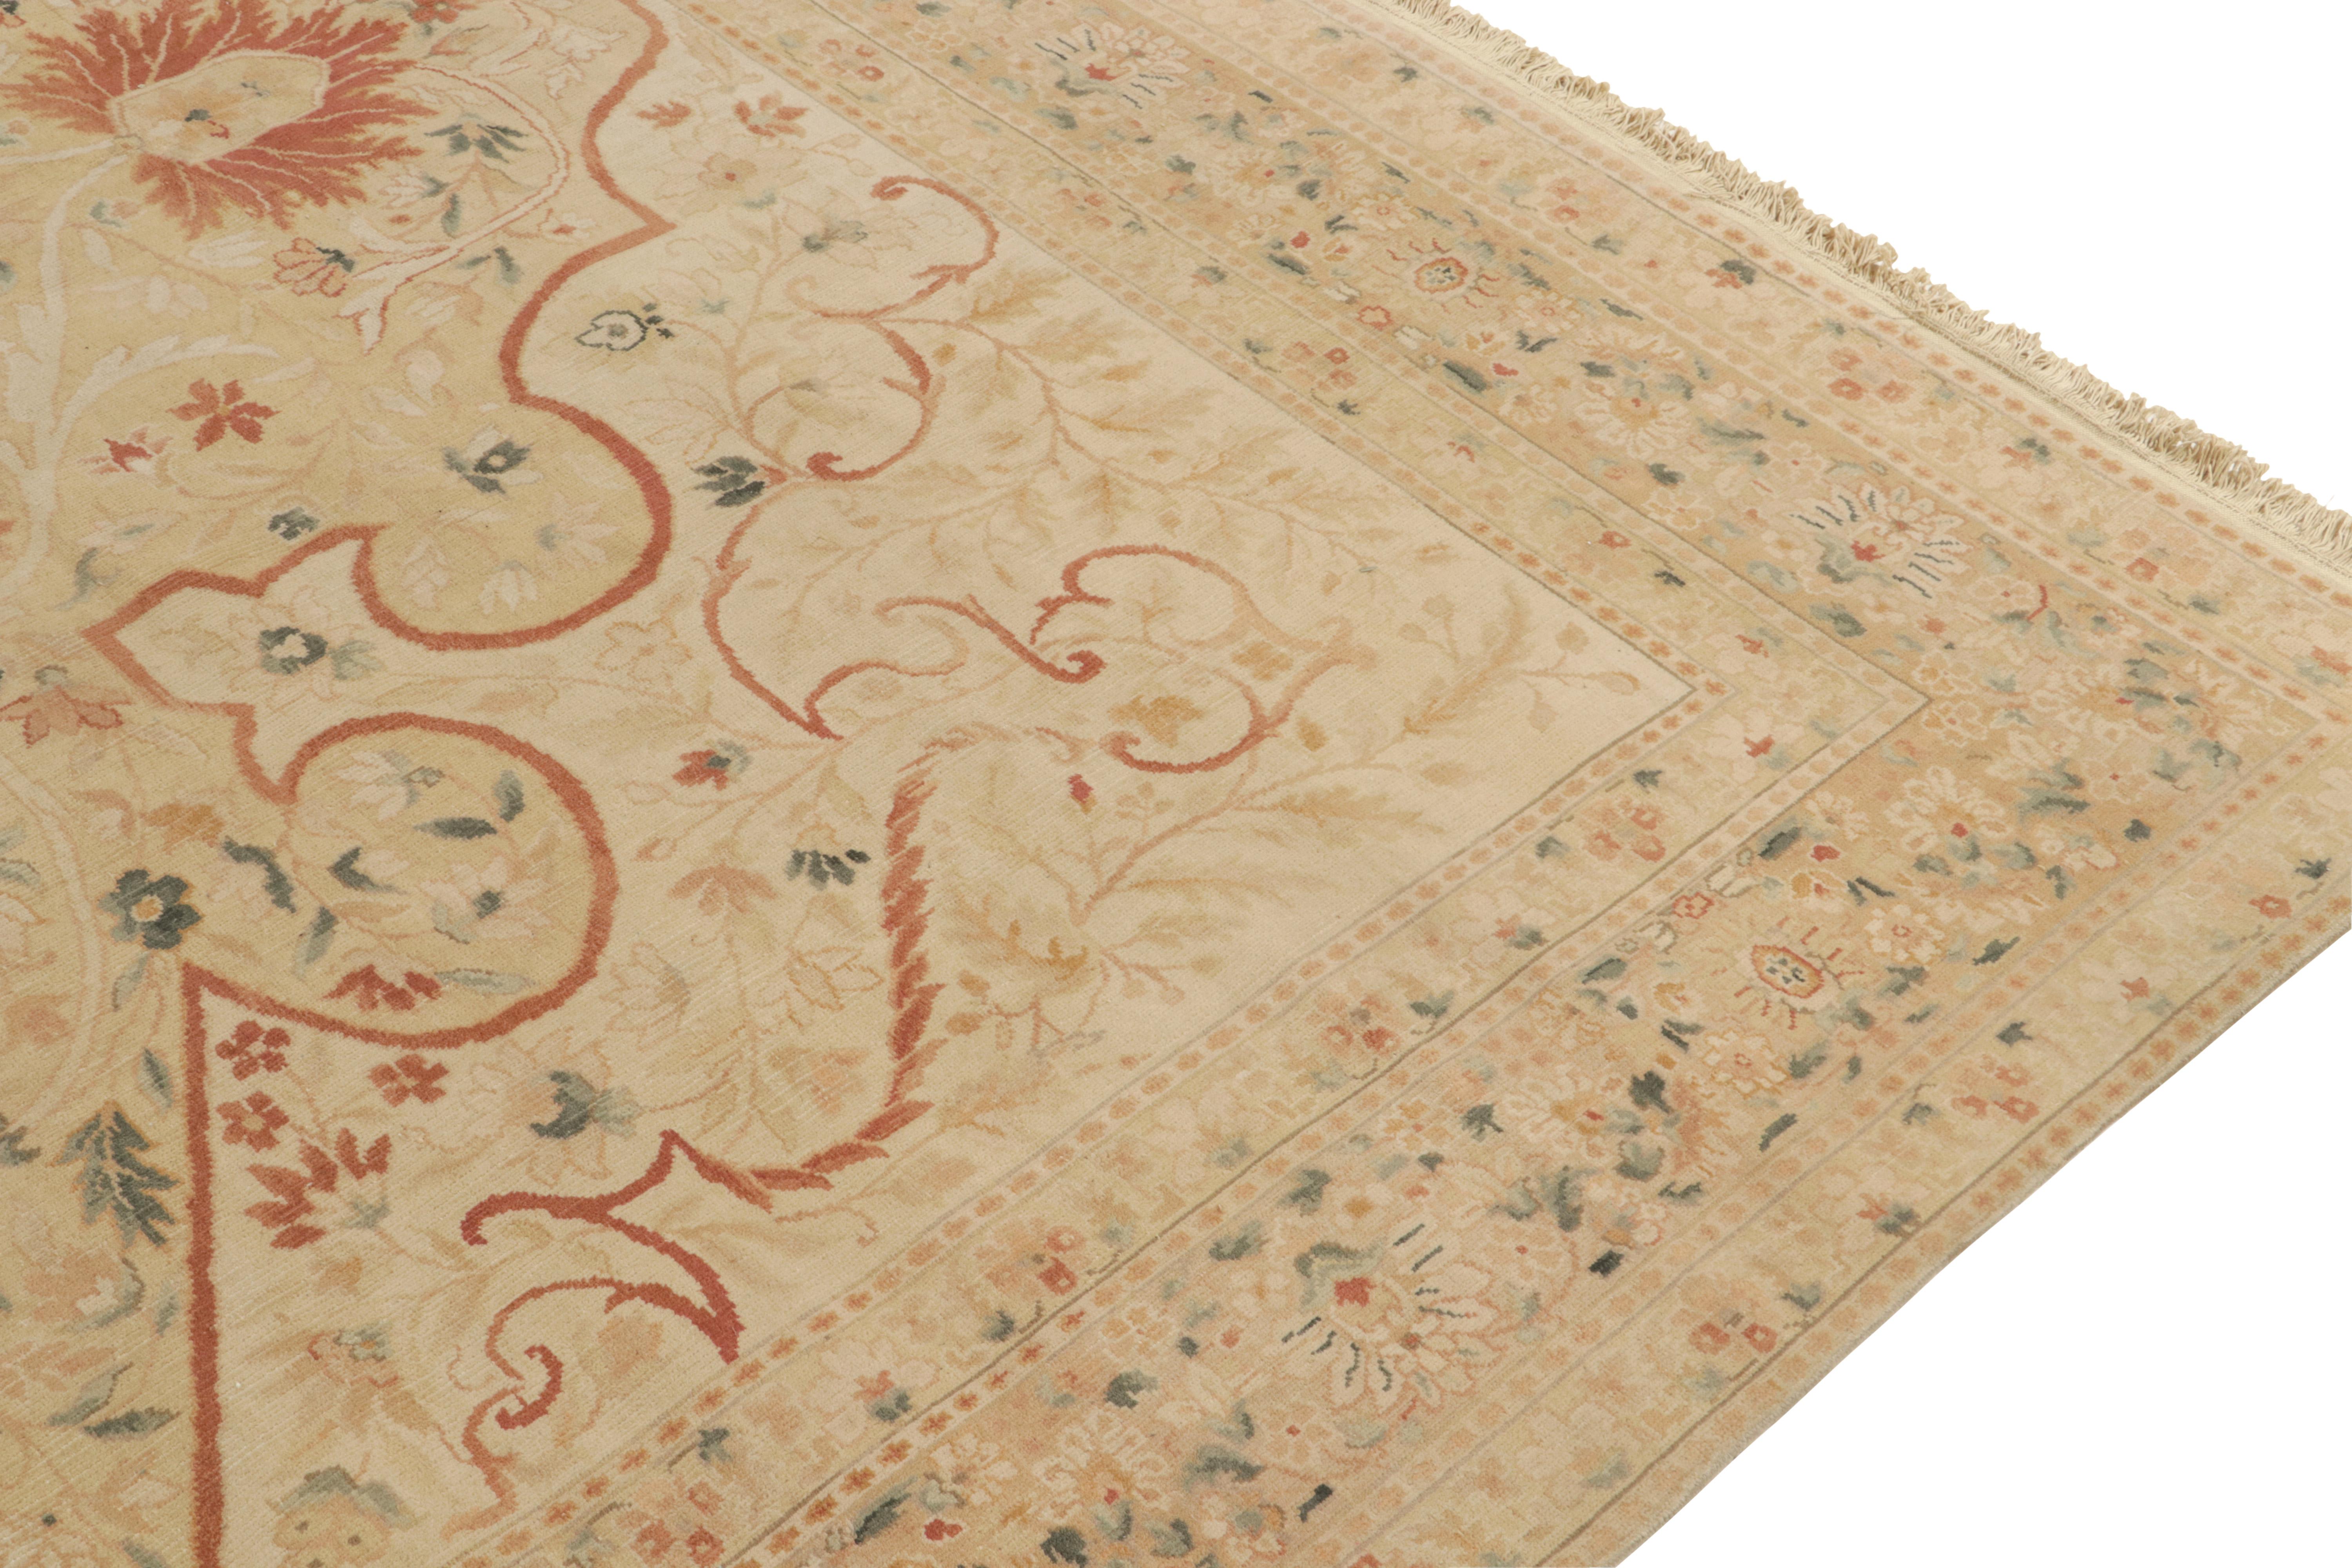 Contemporary Rug & Kilim's Classic Tabriz Style Rug in Beige, Red & Green Floral Pattern For Sale